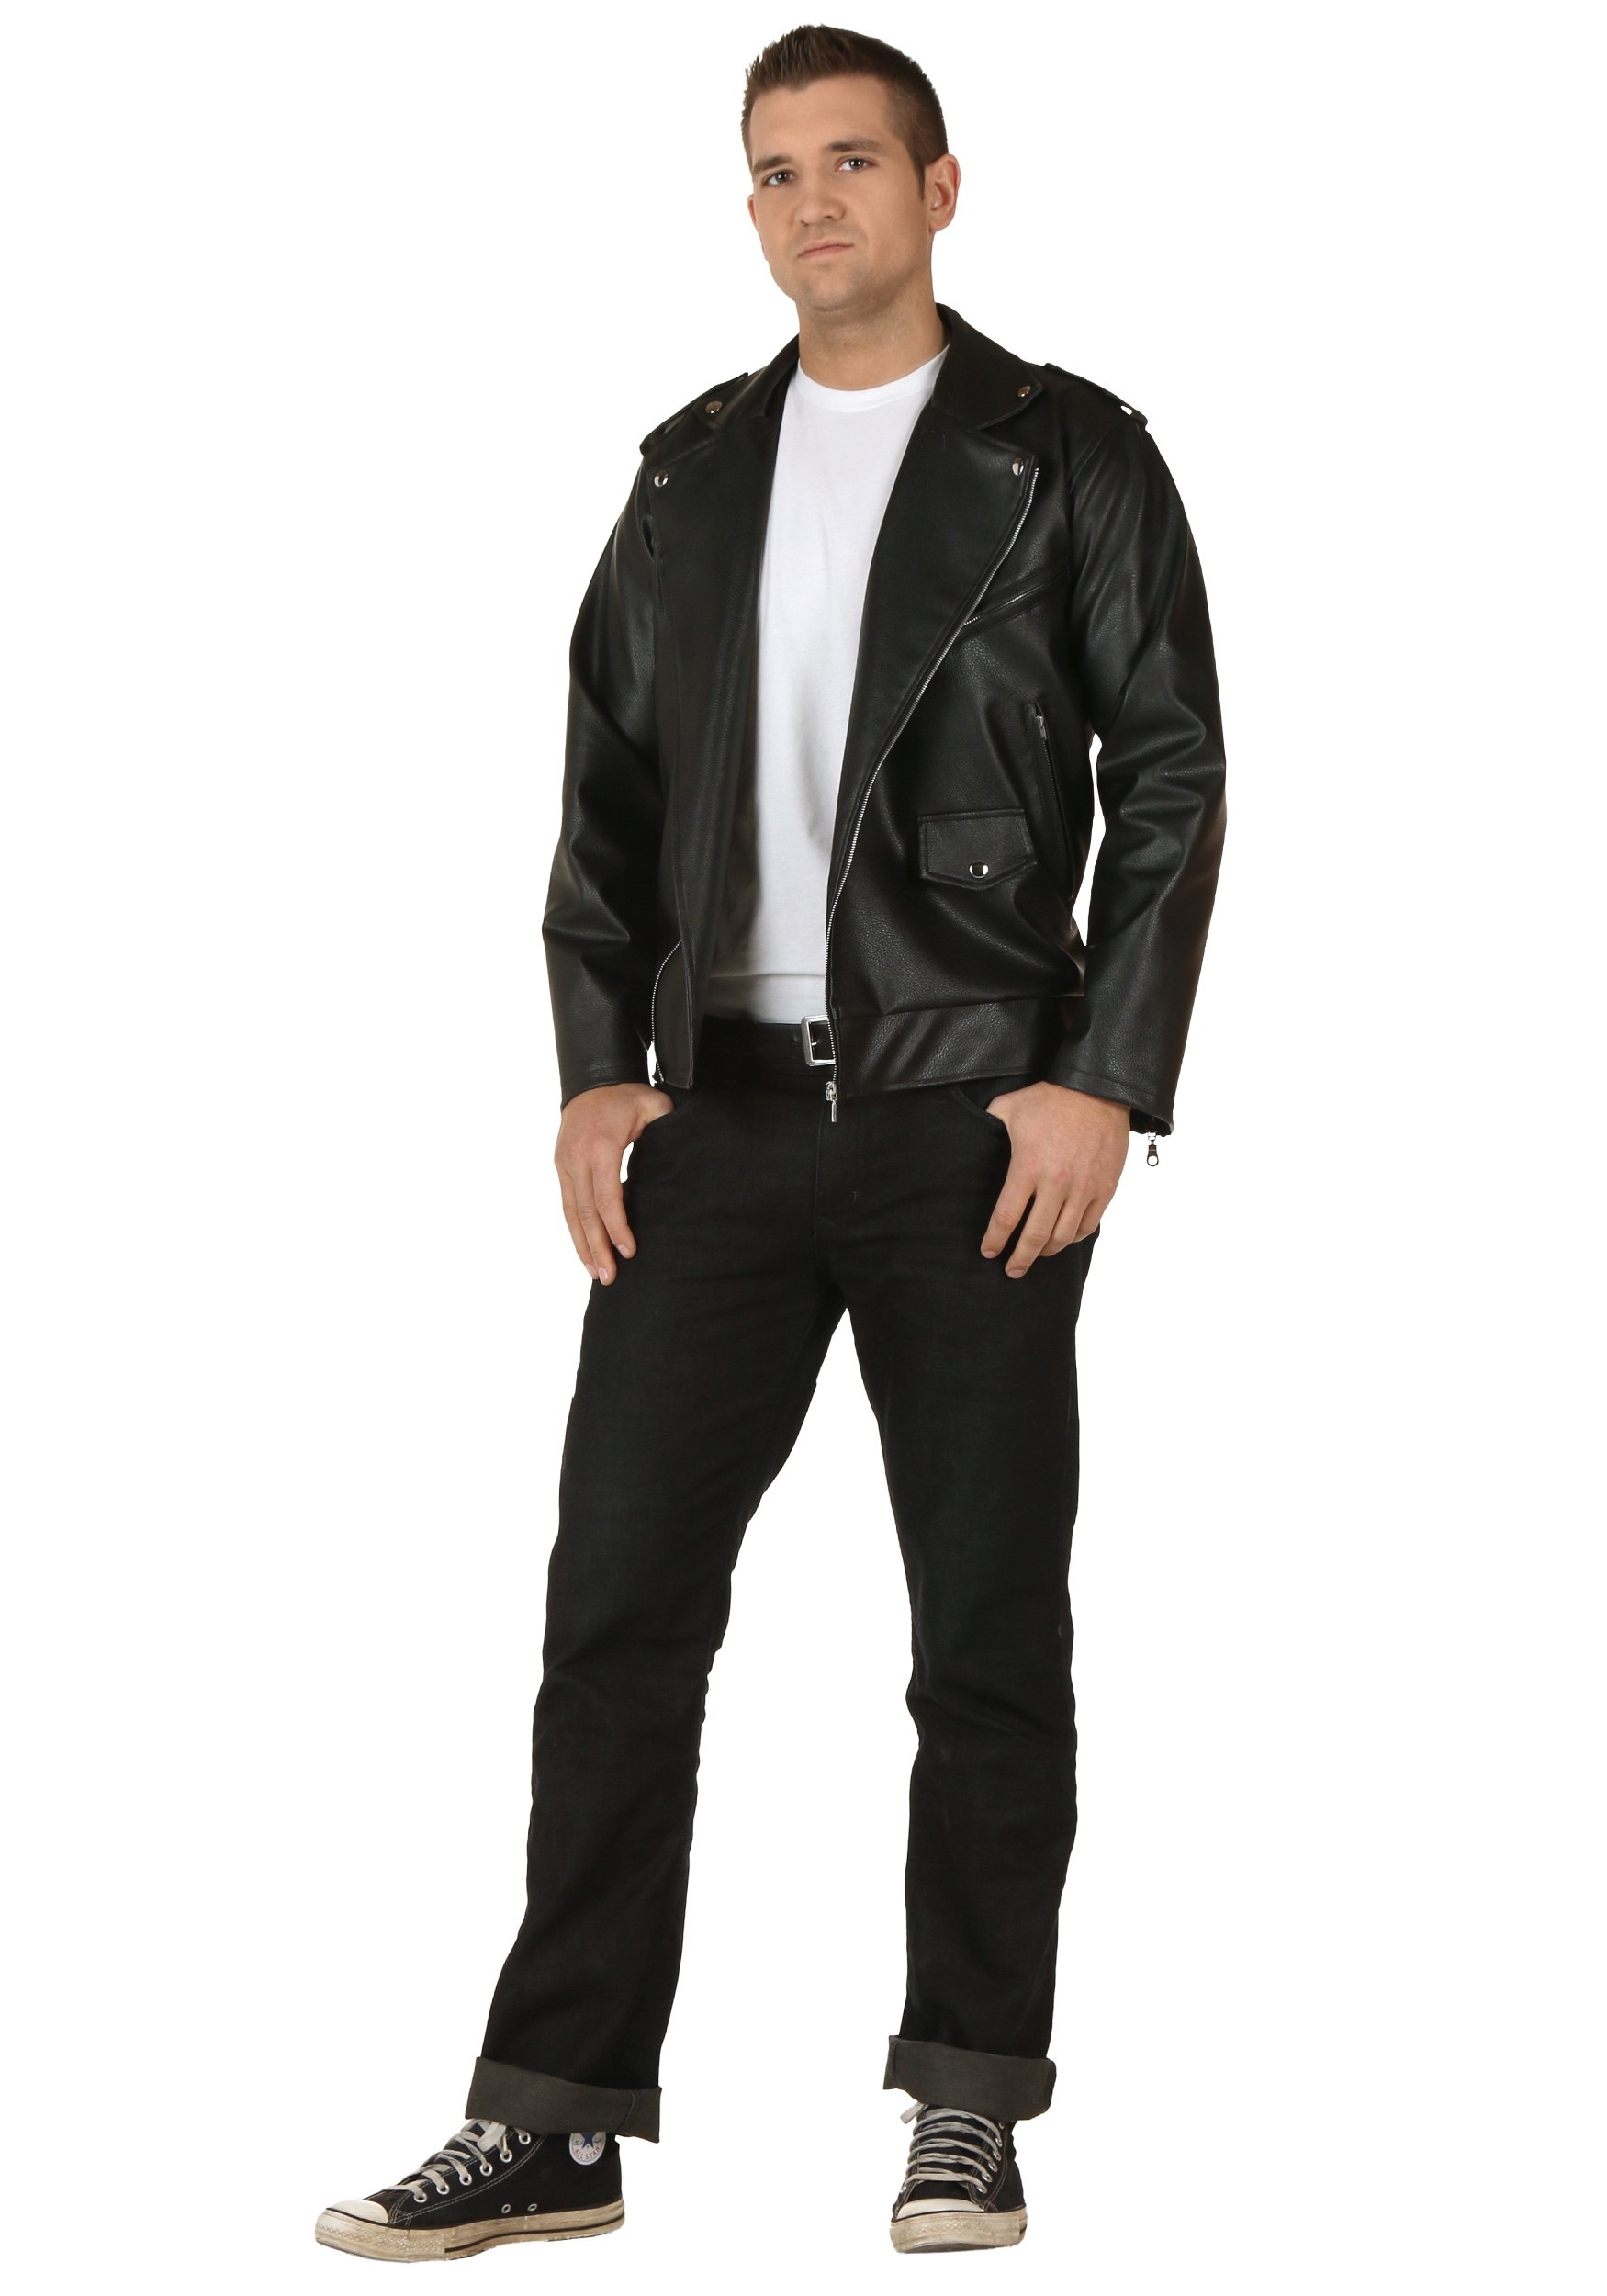 Grease Authentic T-Birds Jacket For Men , Exclusive